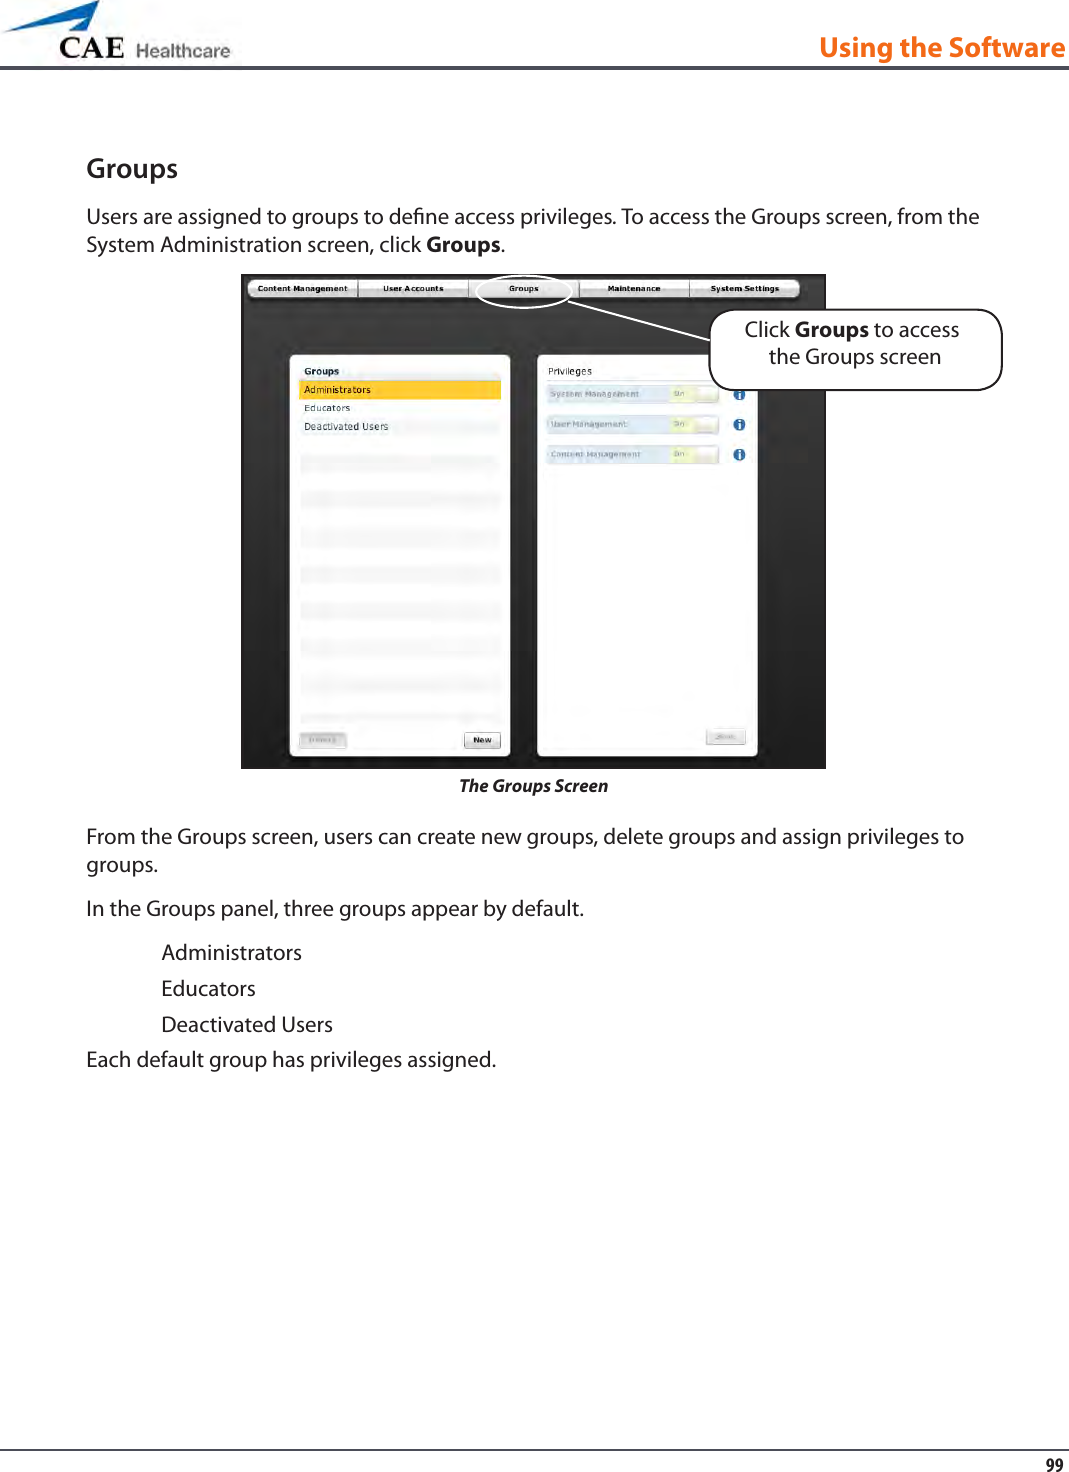 99Using the SoftwareGroupsUsers are assigned to groups to dene access privileges. To access the Groups screen, from the System Administration screen, click Groups.The Groups ScreenFrom the Groups screen, users can create new groups, delete groups and assign privileges to groups. In the Groups panel, three groups appear by default.AdministratorsEducatorsDeactivated UsersEach default group has privileges assigned. Click Groups to access the Groups screen